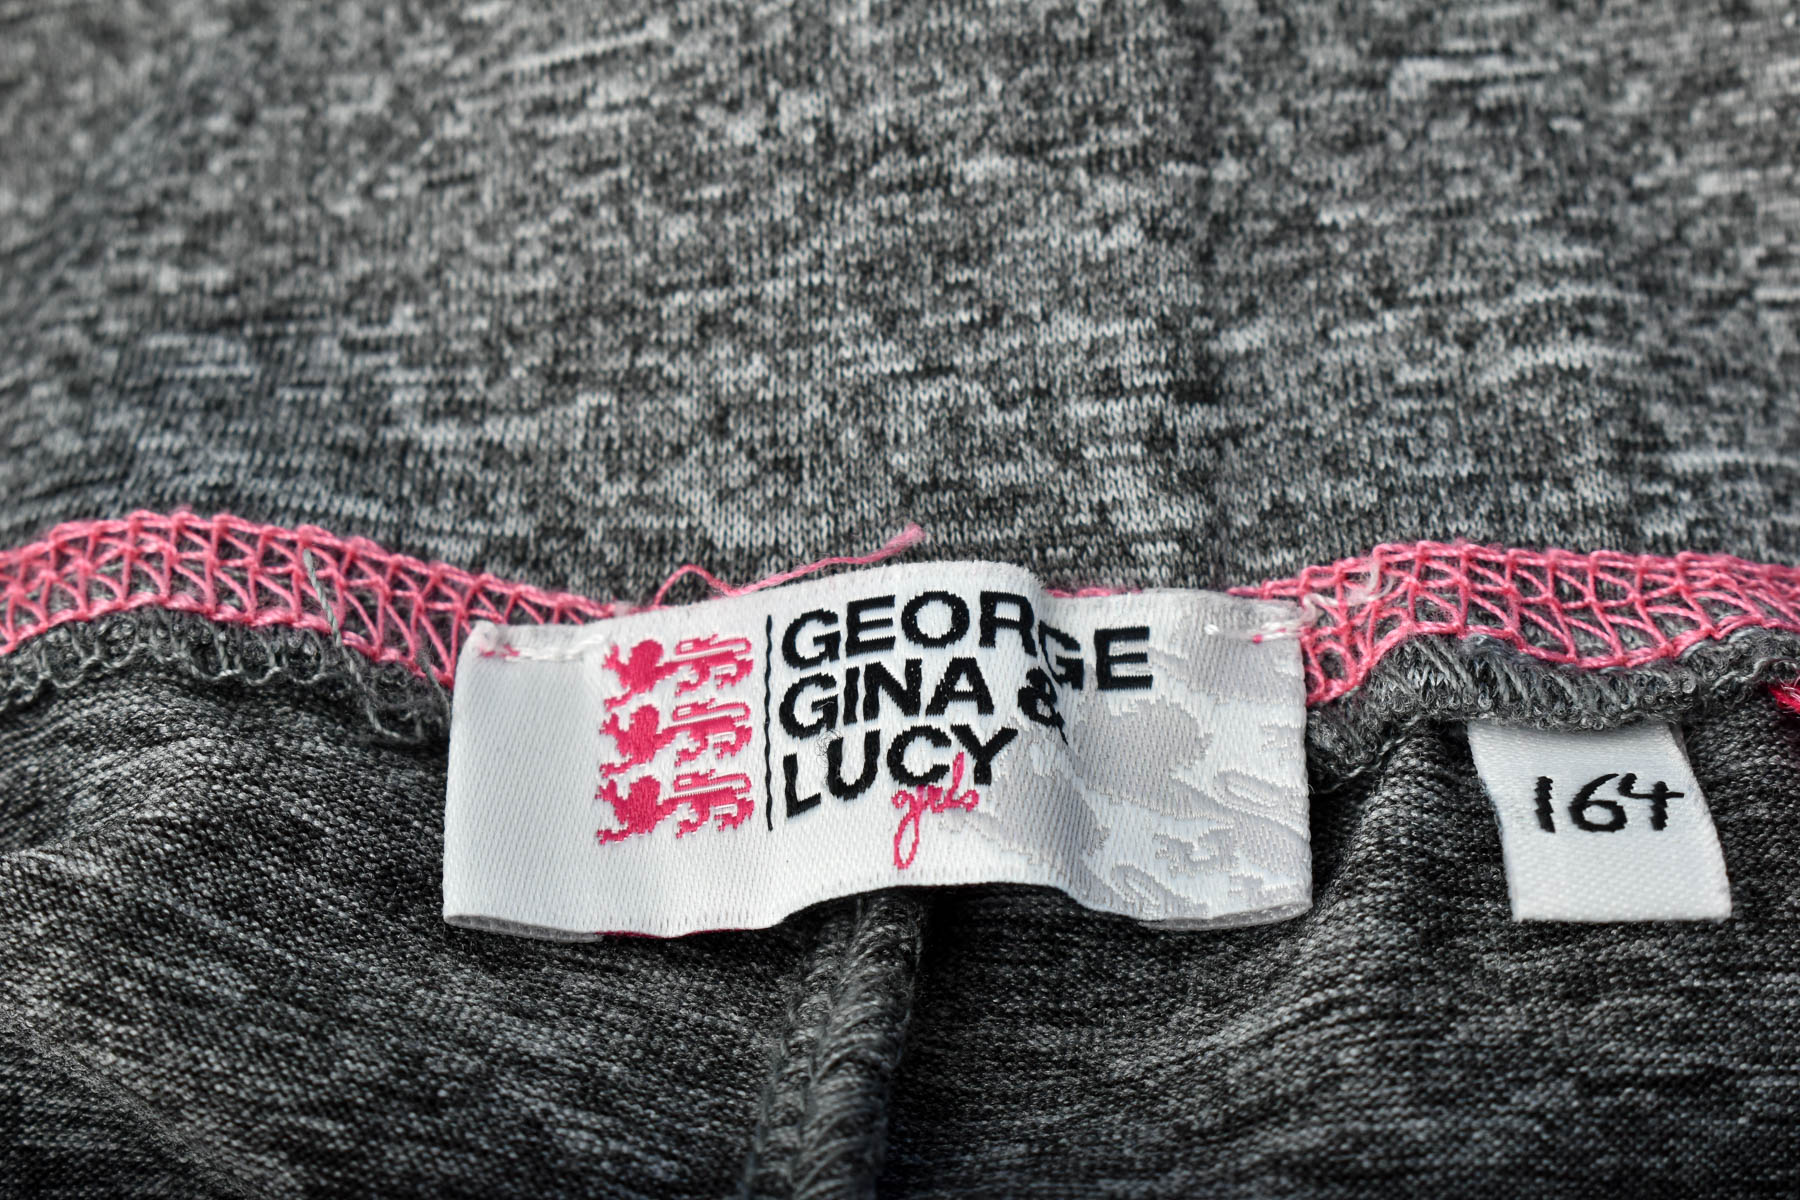 Leggings - George Gina & Lucy - 2